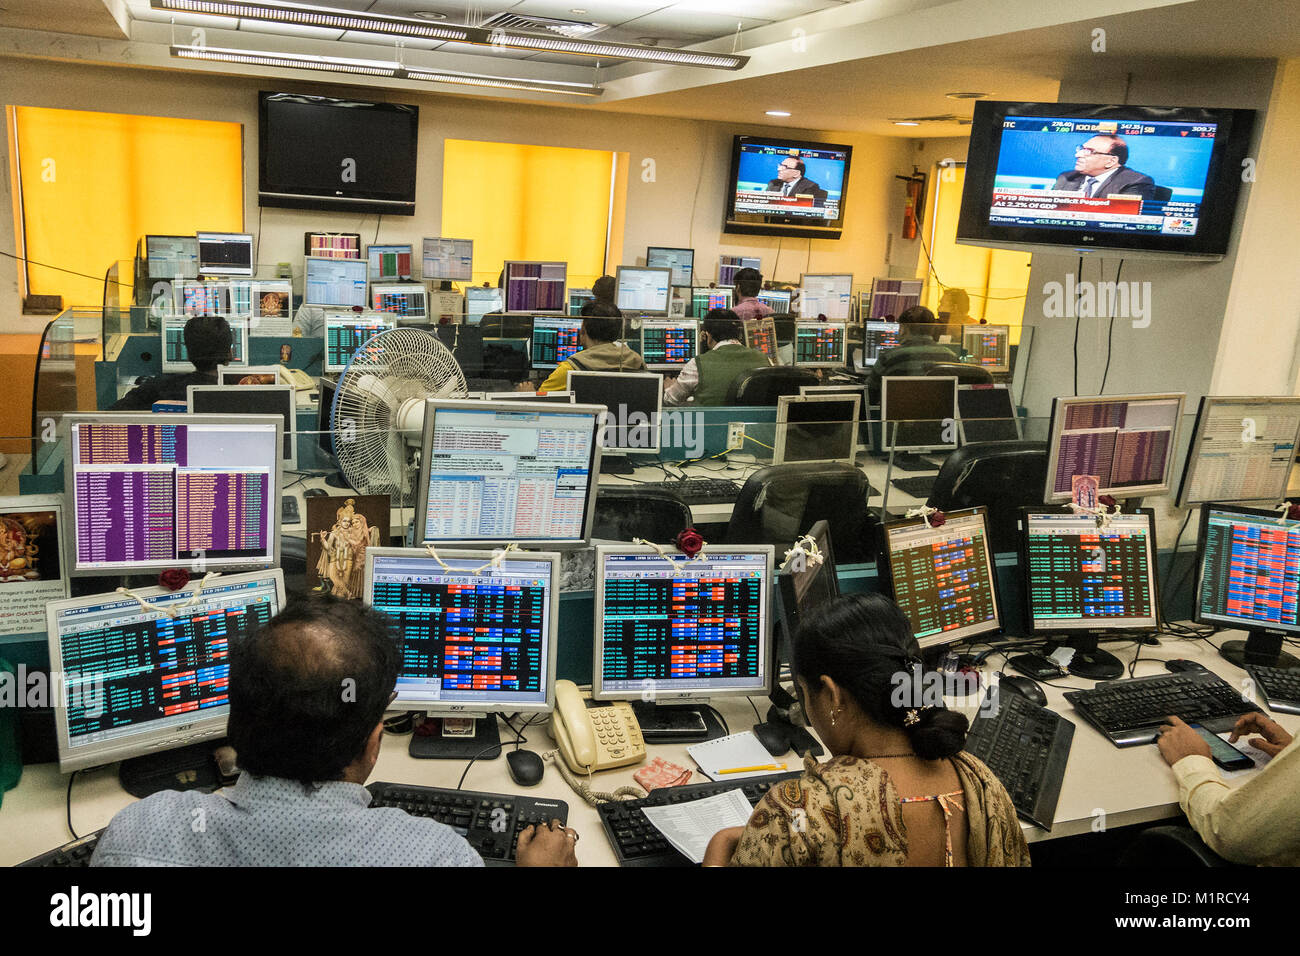 Kolkata, India. 1st Feb, 2018. Stock dealers work at a brokerage house in Kolkata, India, on Feb. 1, 2018. The Indian government on Thursday unveiled its budget for the financial year 2018-19, with a focus on agriculture, infrastructure and healthcare. Credit: Tumpa Mondal/Xinhua/Alamy Live News Stock Photo